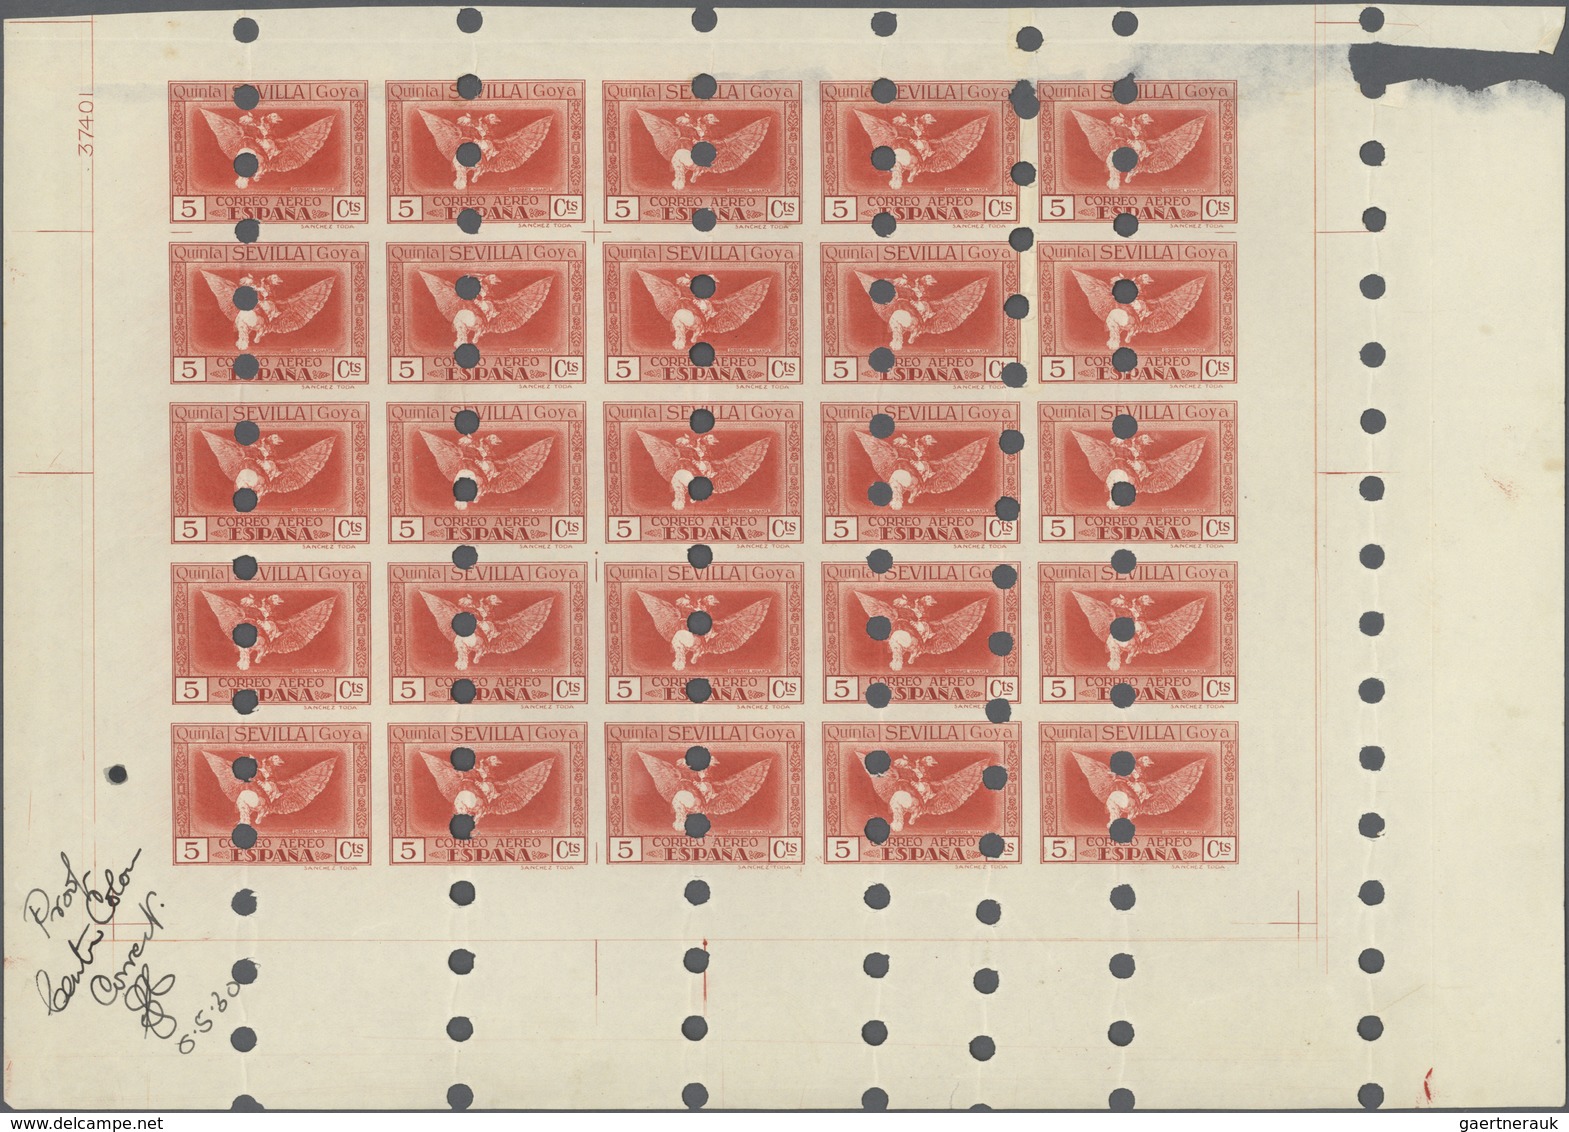 Spanien: 1930, Death Centenary of Goya, 5c. to 10pts. and express stamp 20c., set of ten different i